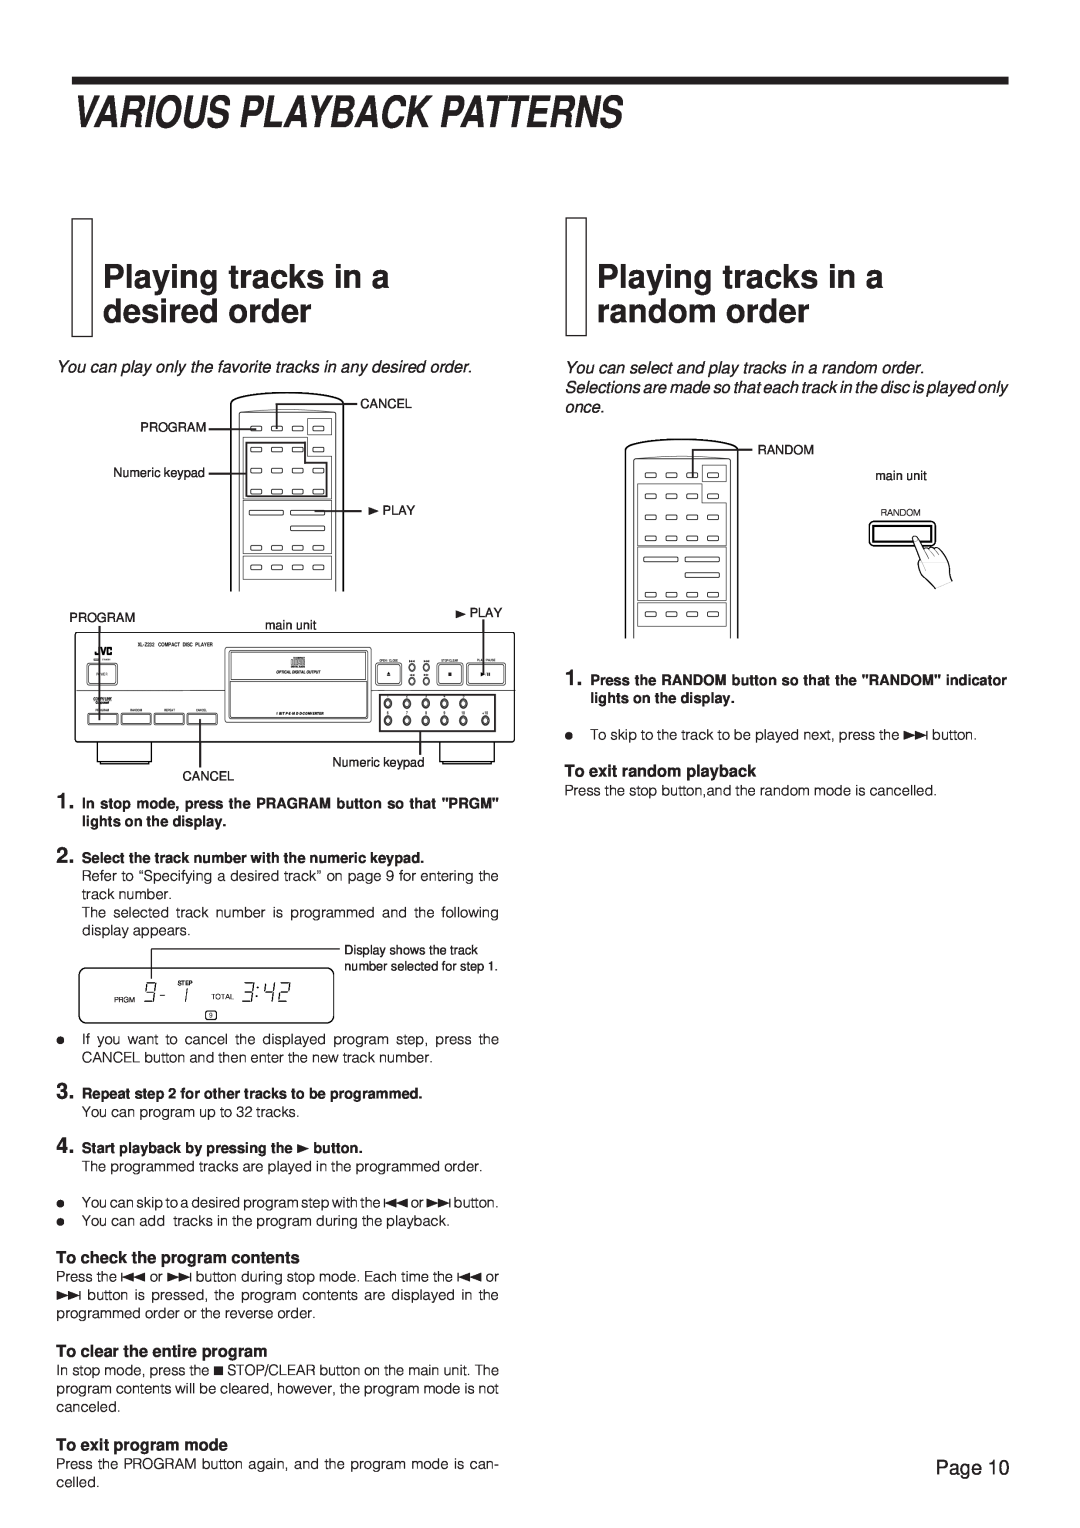 JVC XL-Z132BK manual Various Playback Patterns, Playing tracks in a desired order, Playing tracks in a random order, Page 